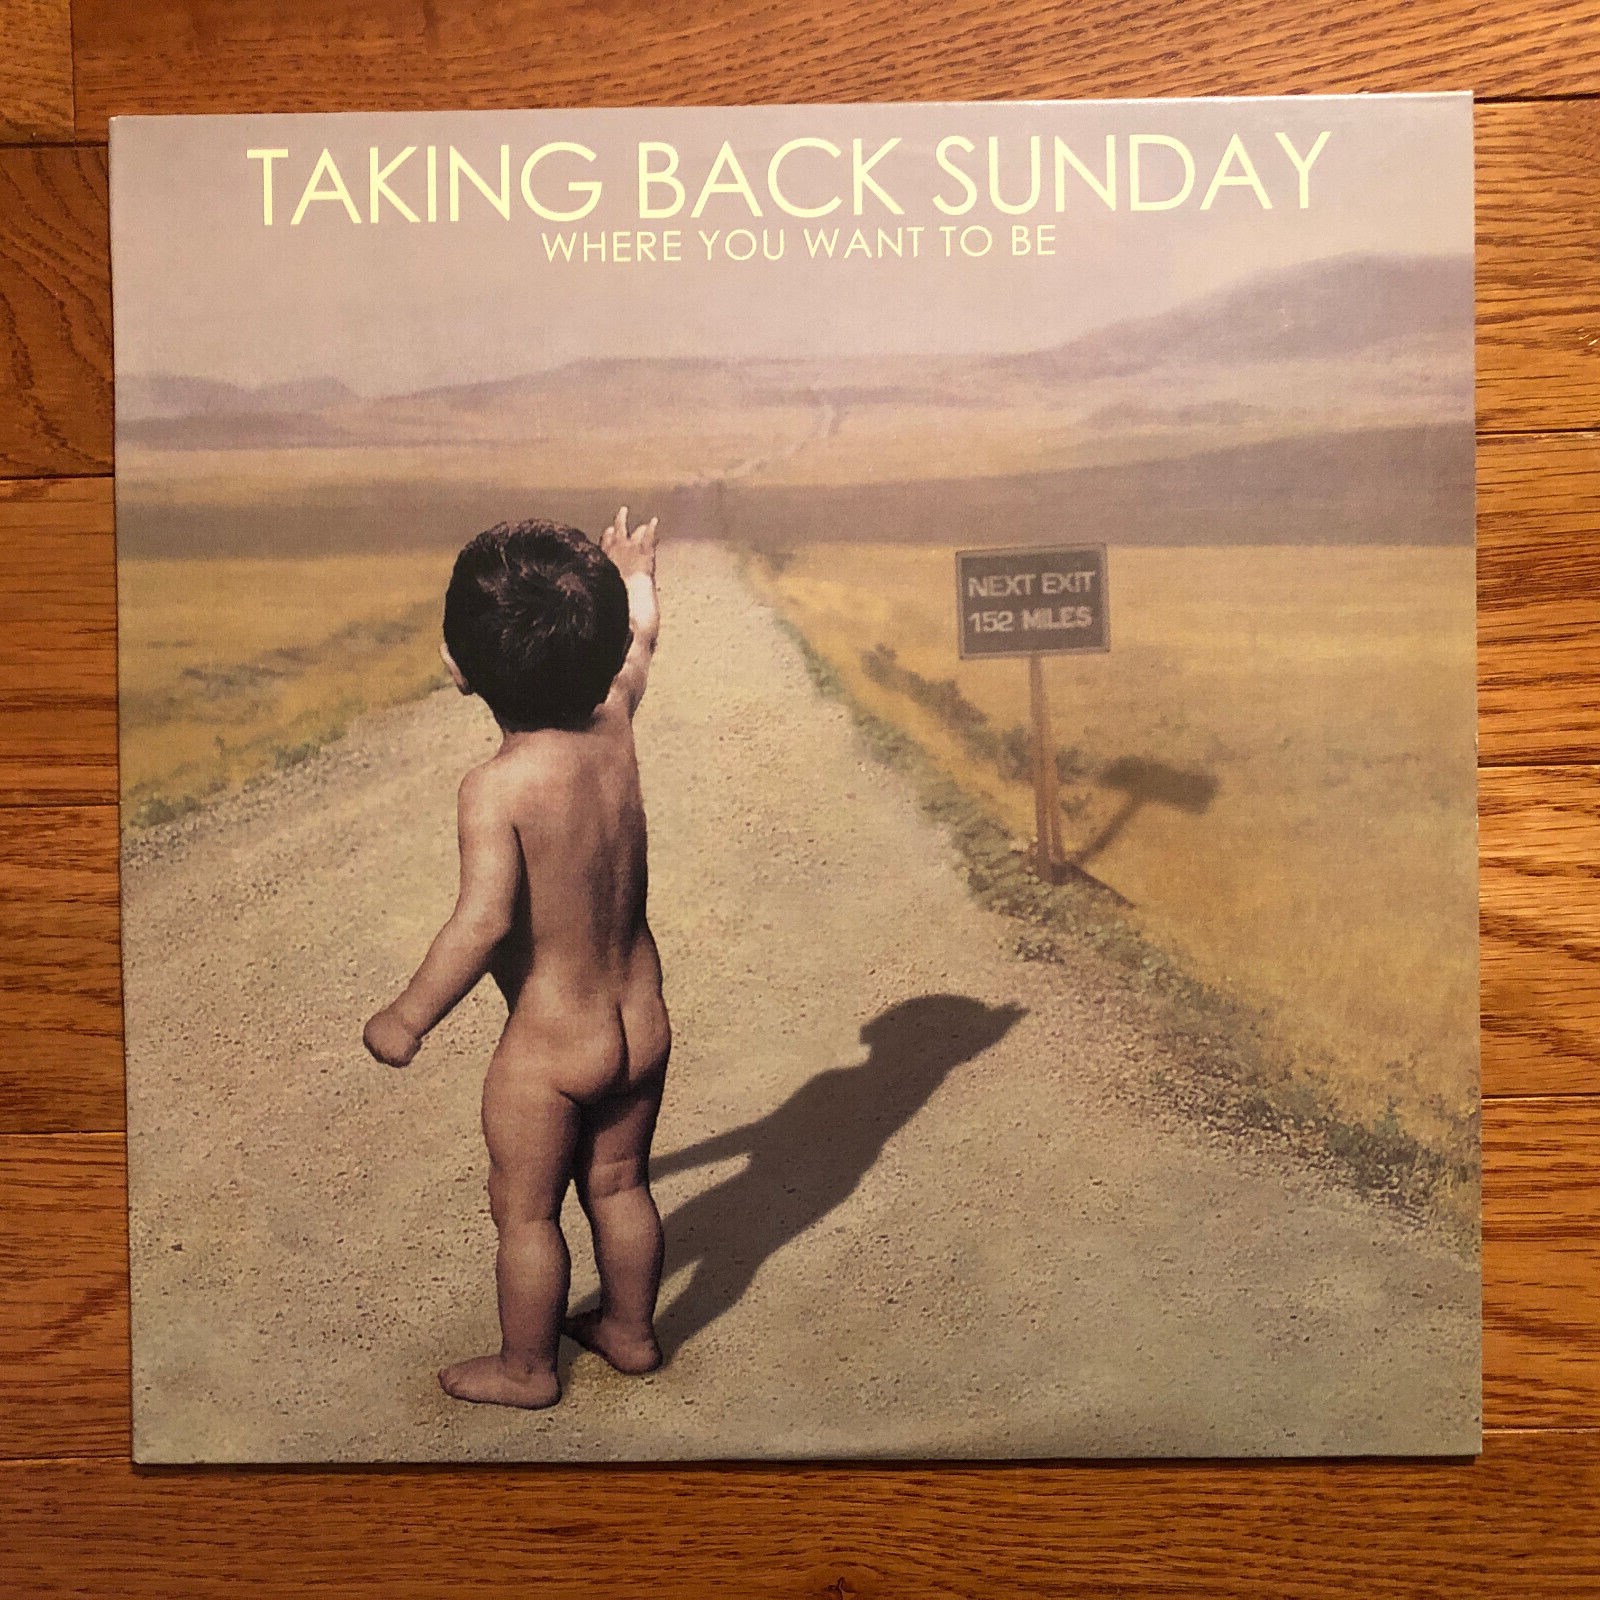 Taking Back Sunday - Where You Want to Be LP 180g Victory 2013 w/ Insert VG+